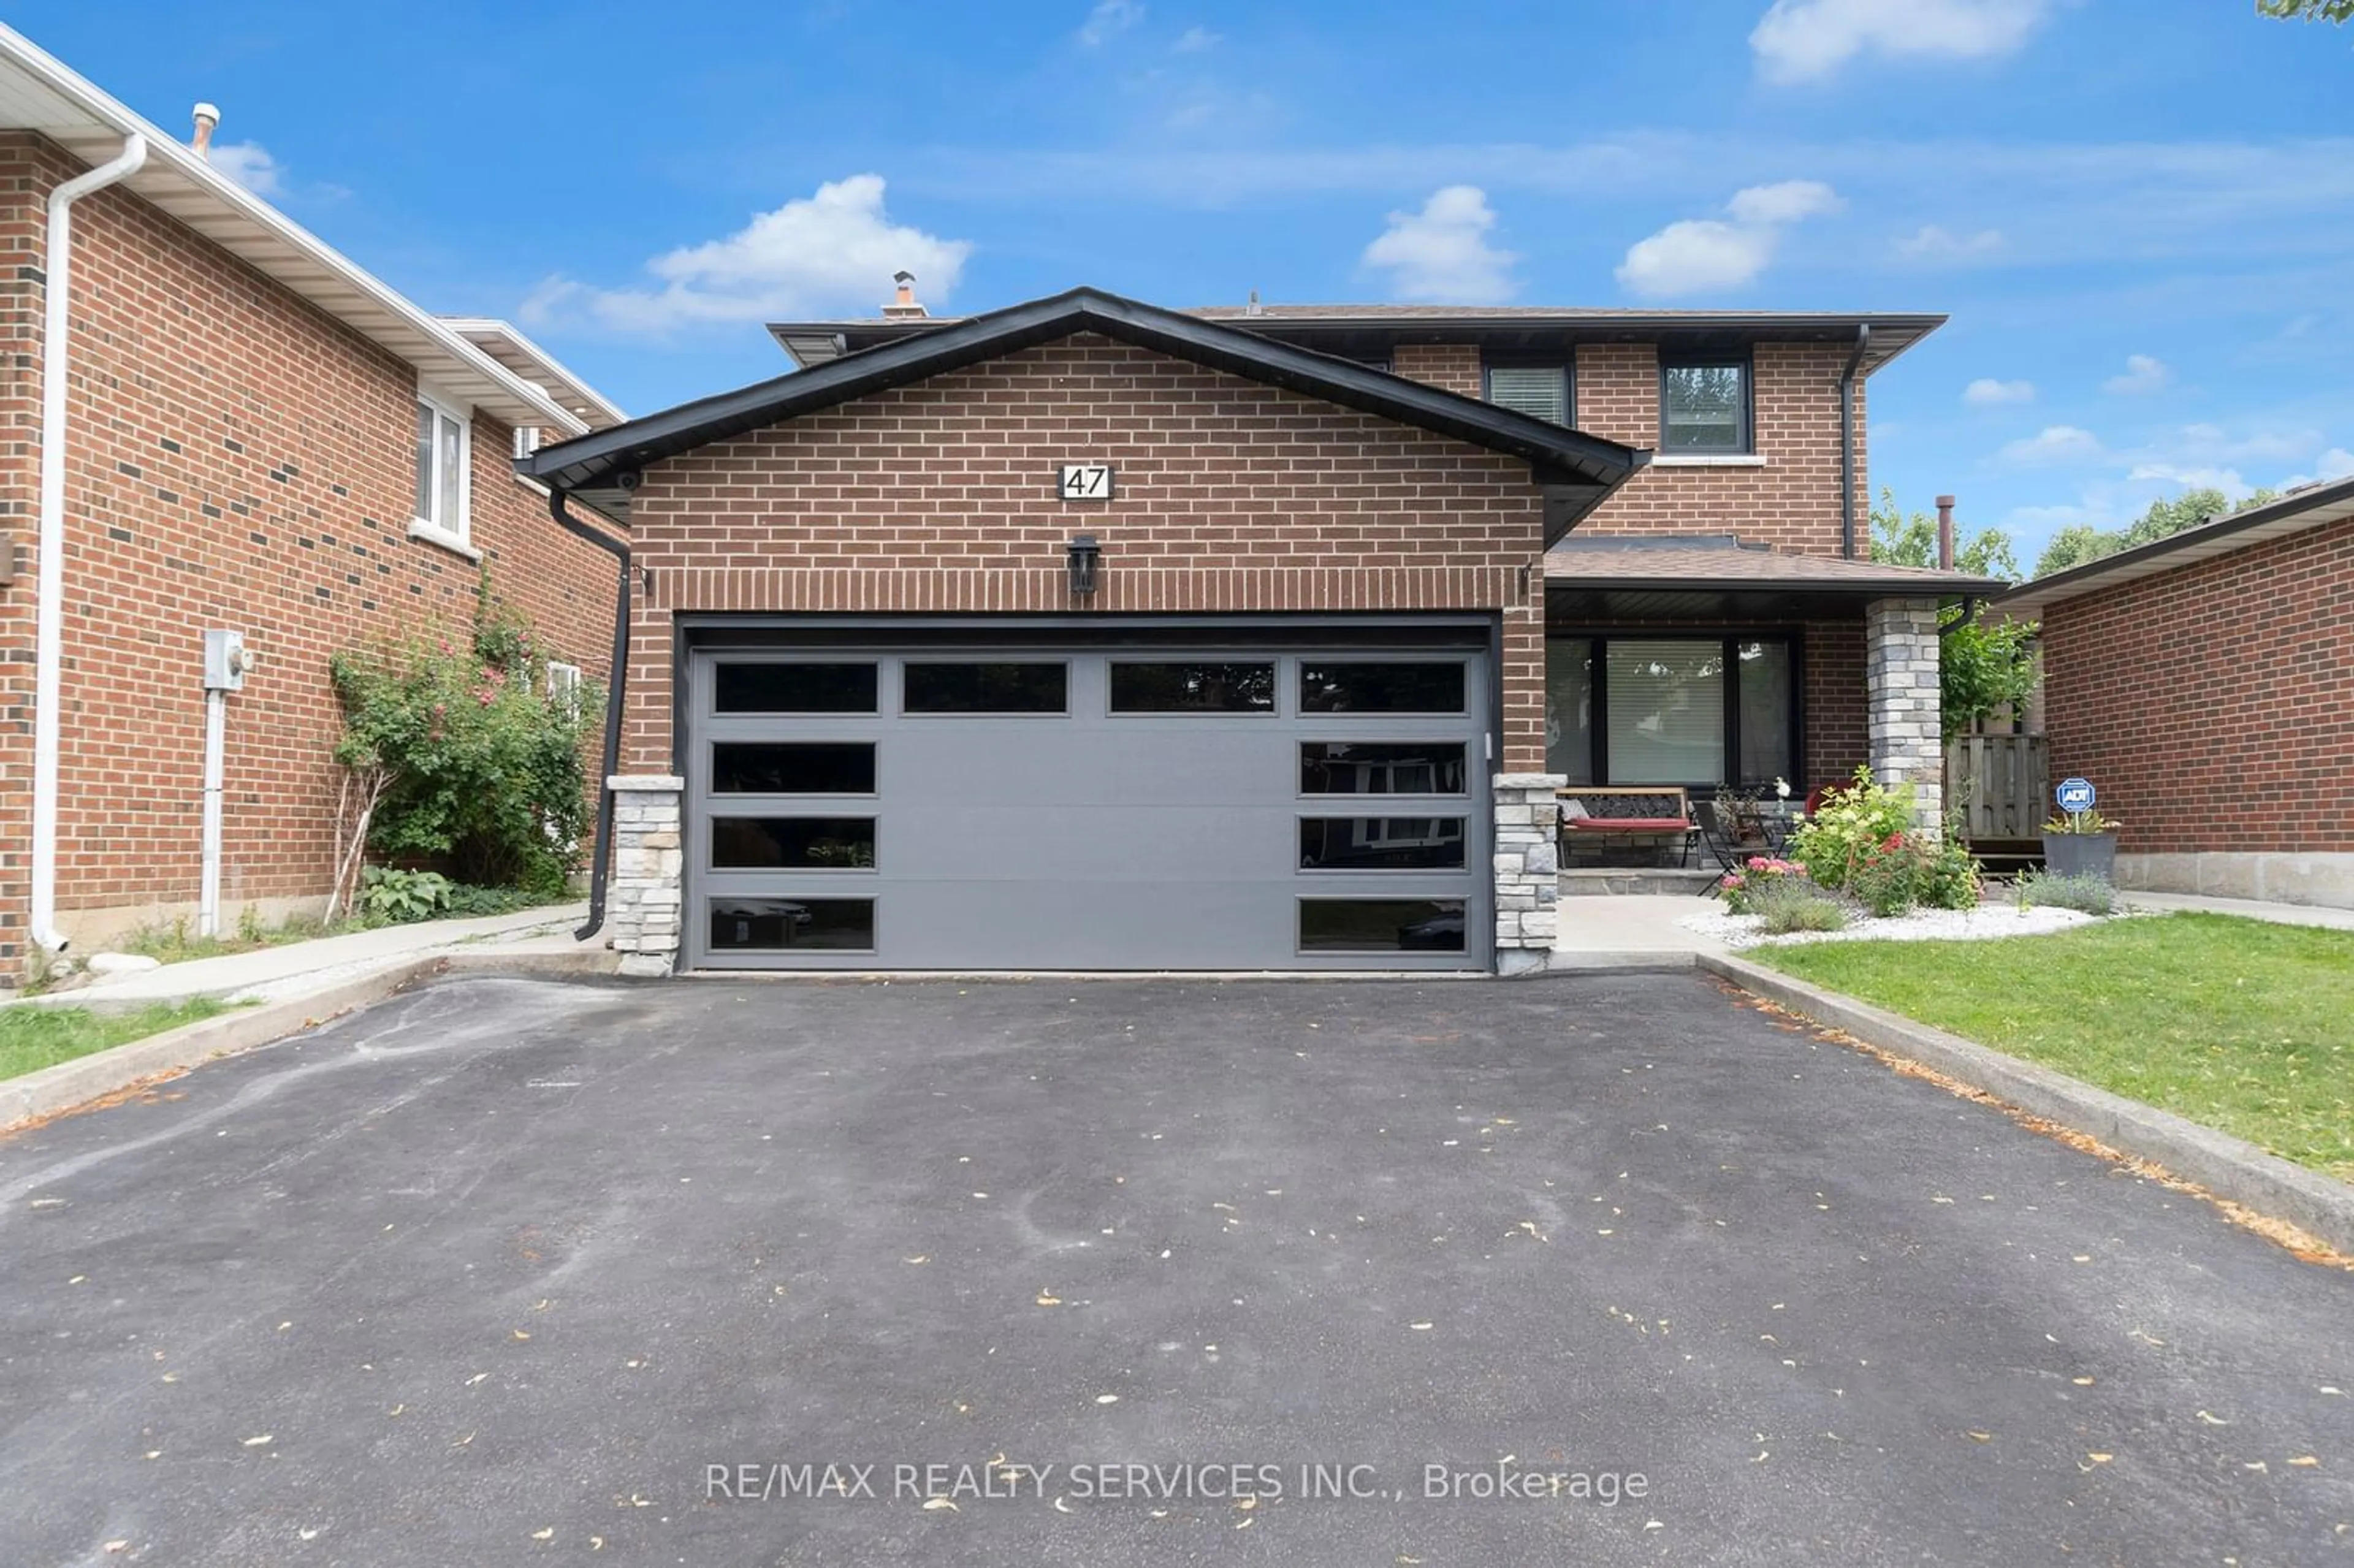 Home with brick exterior material for 47 Tanager Sq, Brampton Ontario L6Z 1X1